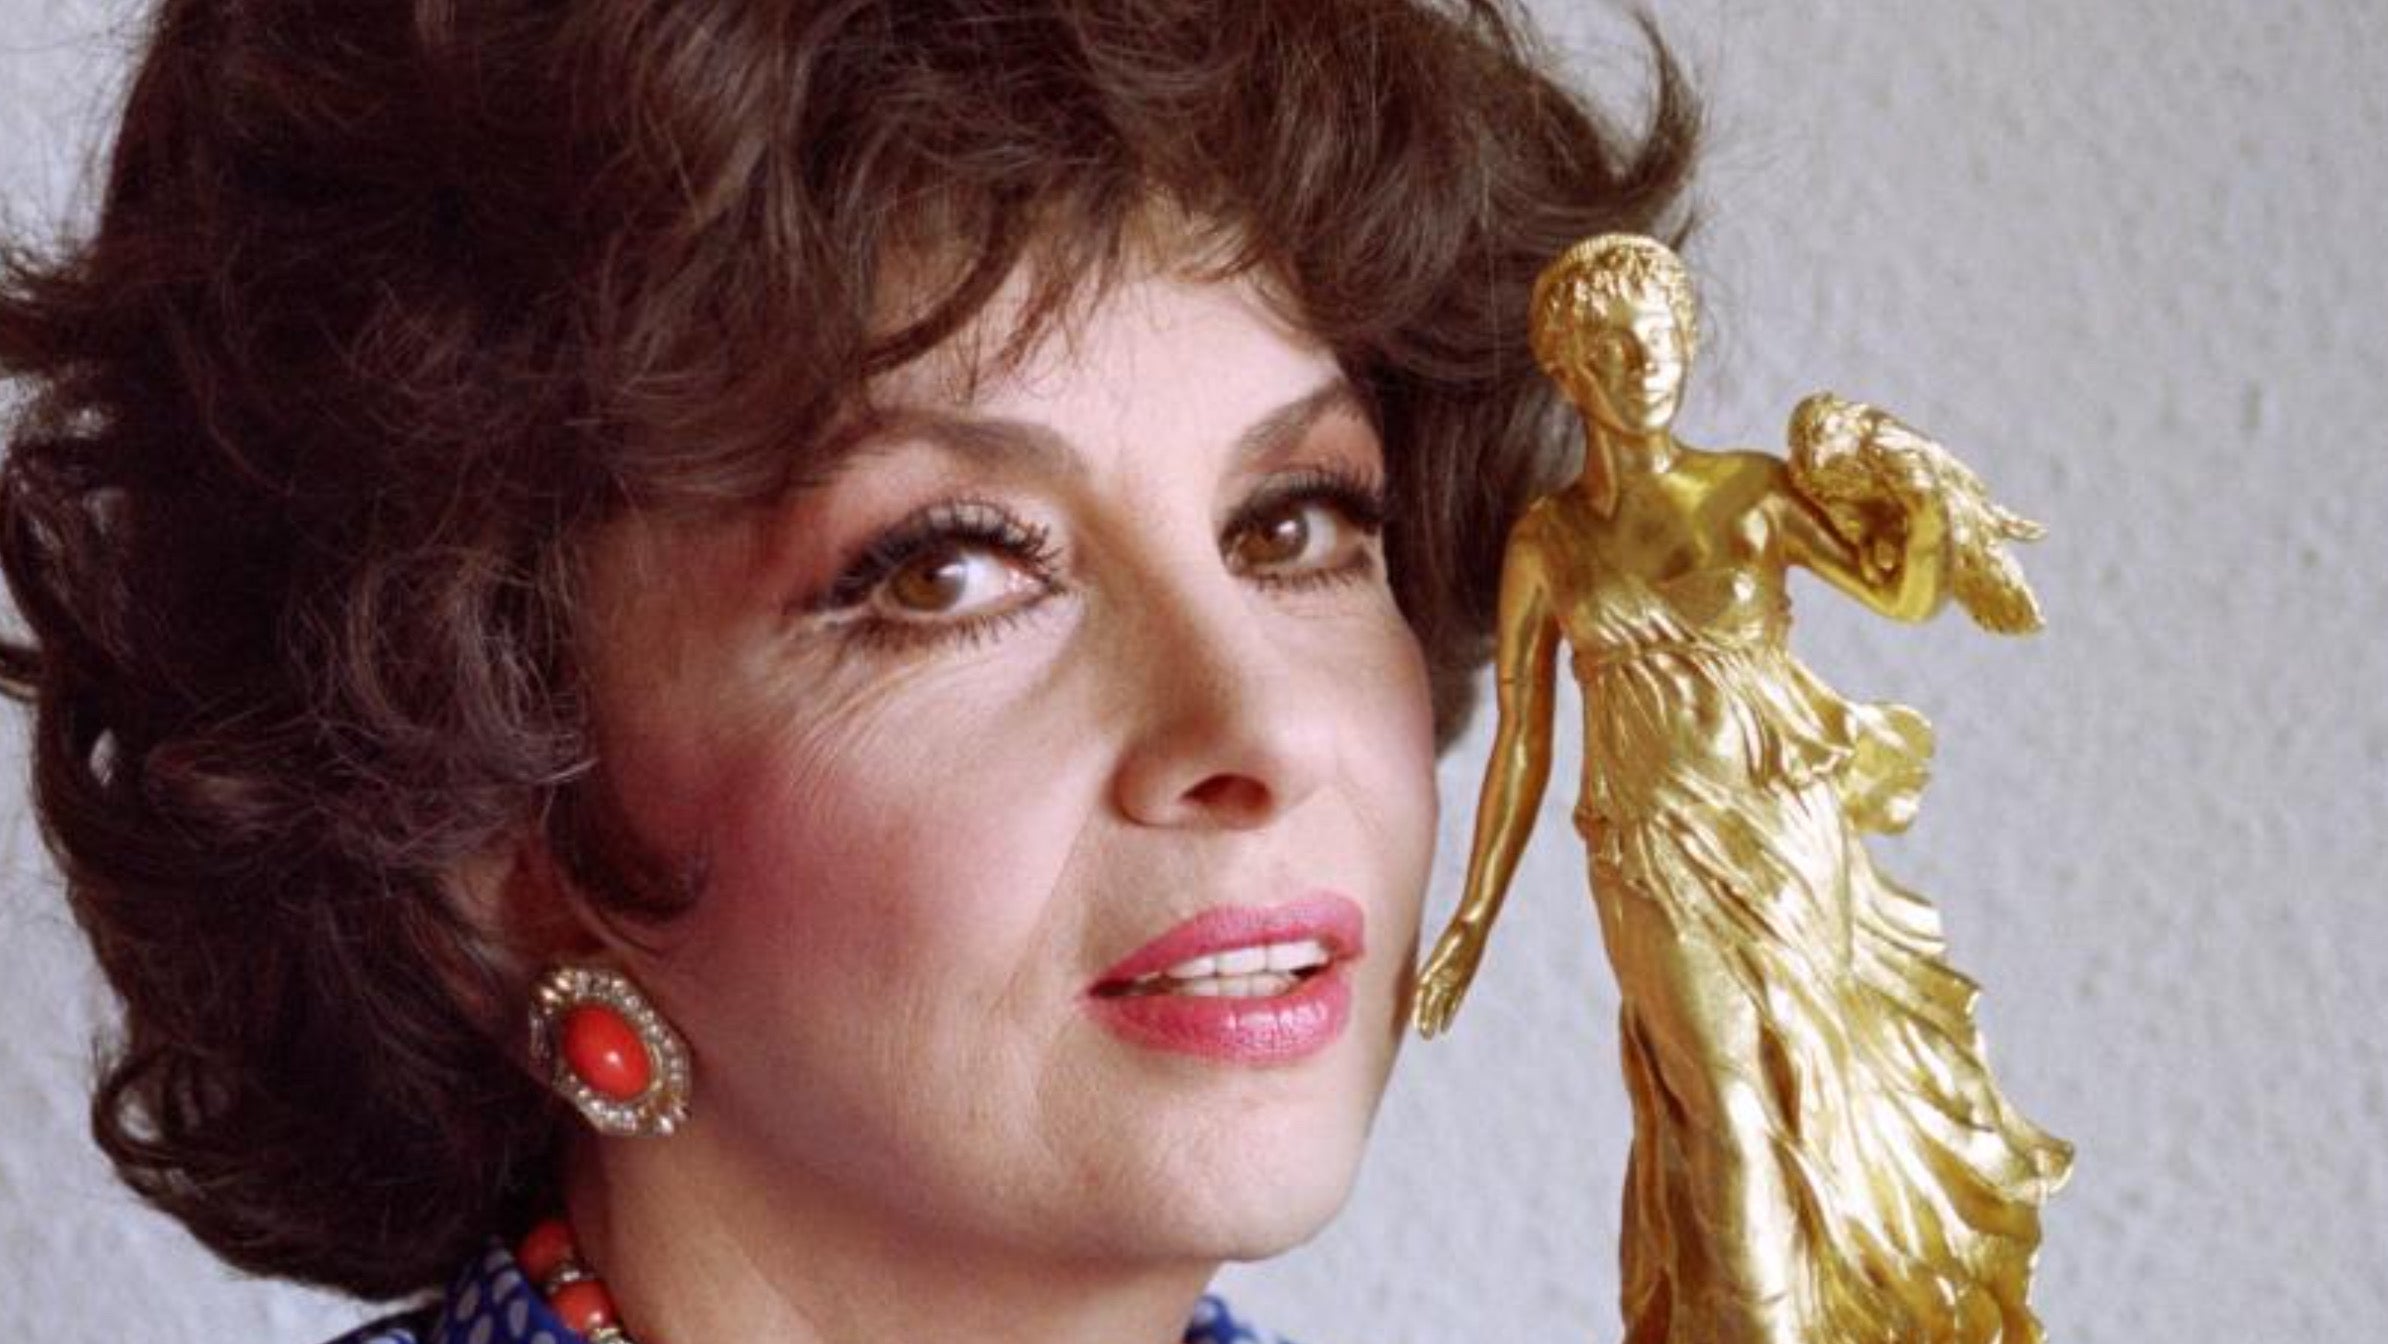 The Italian actress Gina Lollobrigida died at the age of 95, Magnate Daily